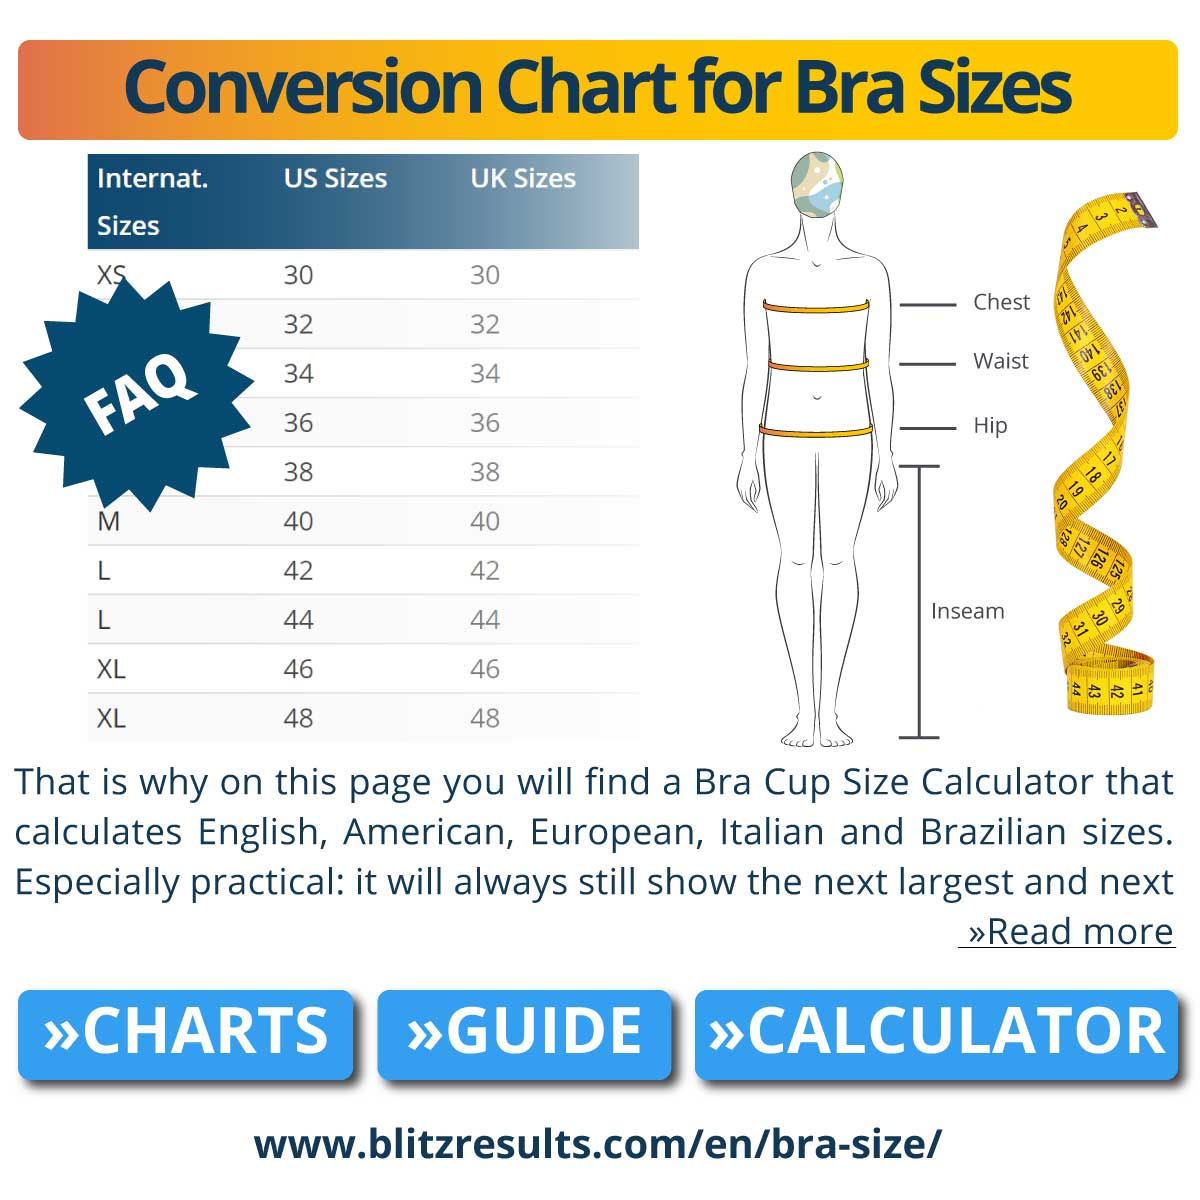 Conversion Chart for Bra Sizes